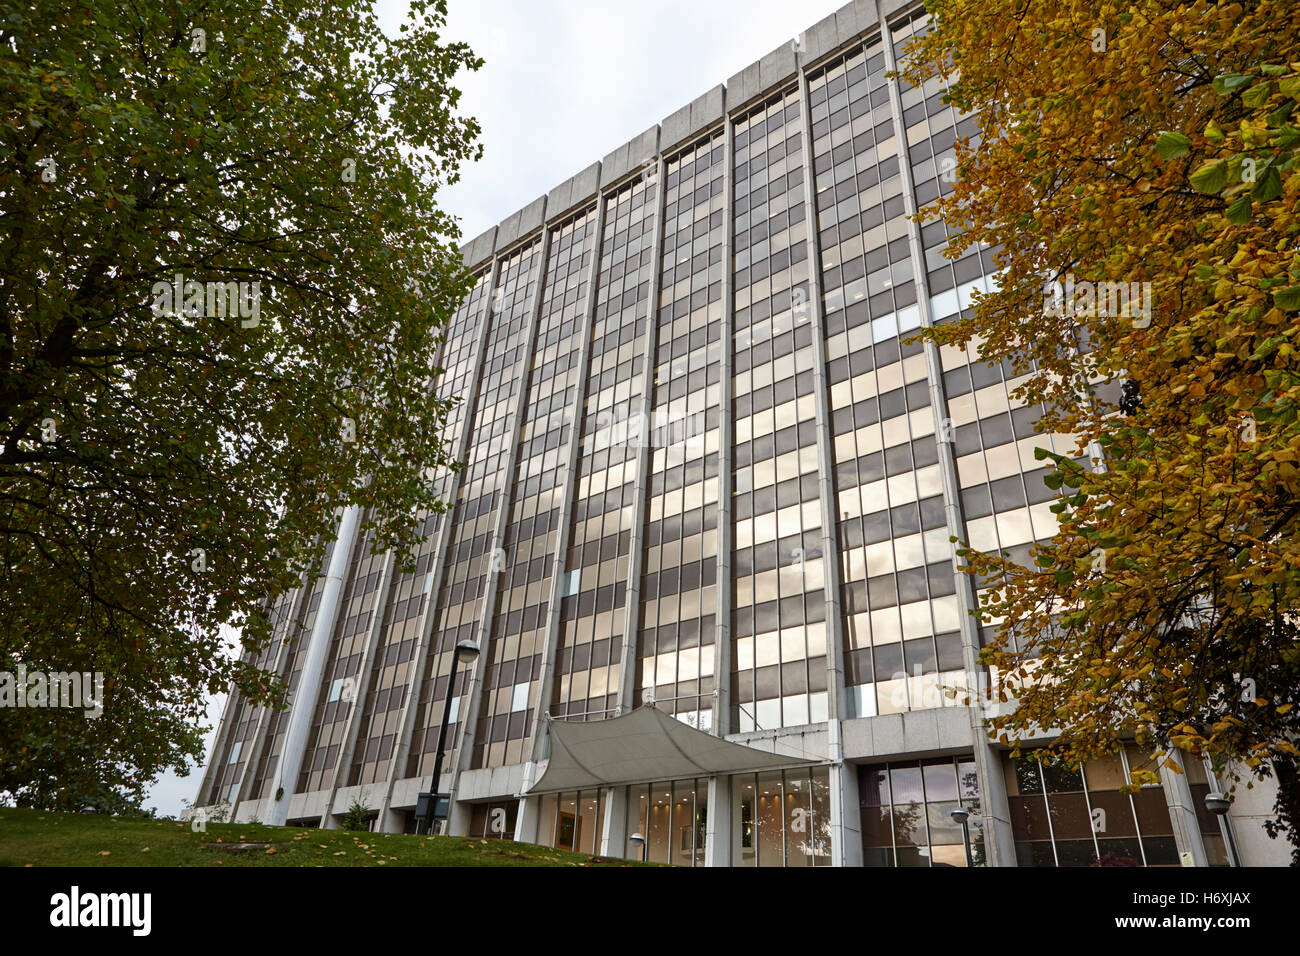 brunel house office building home to hmrc amongst others Cardiff Wales United Kingdom Stock Photo